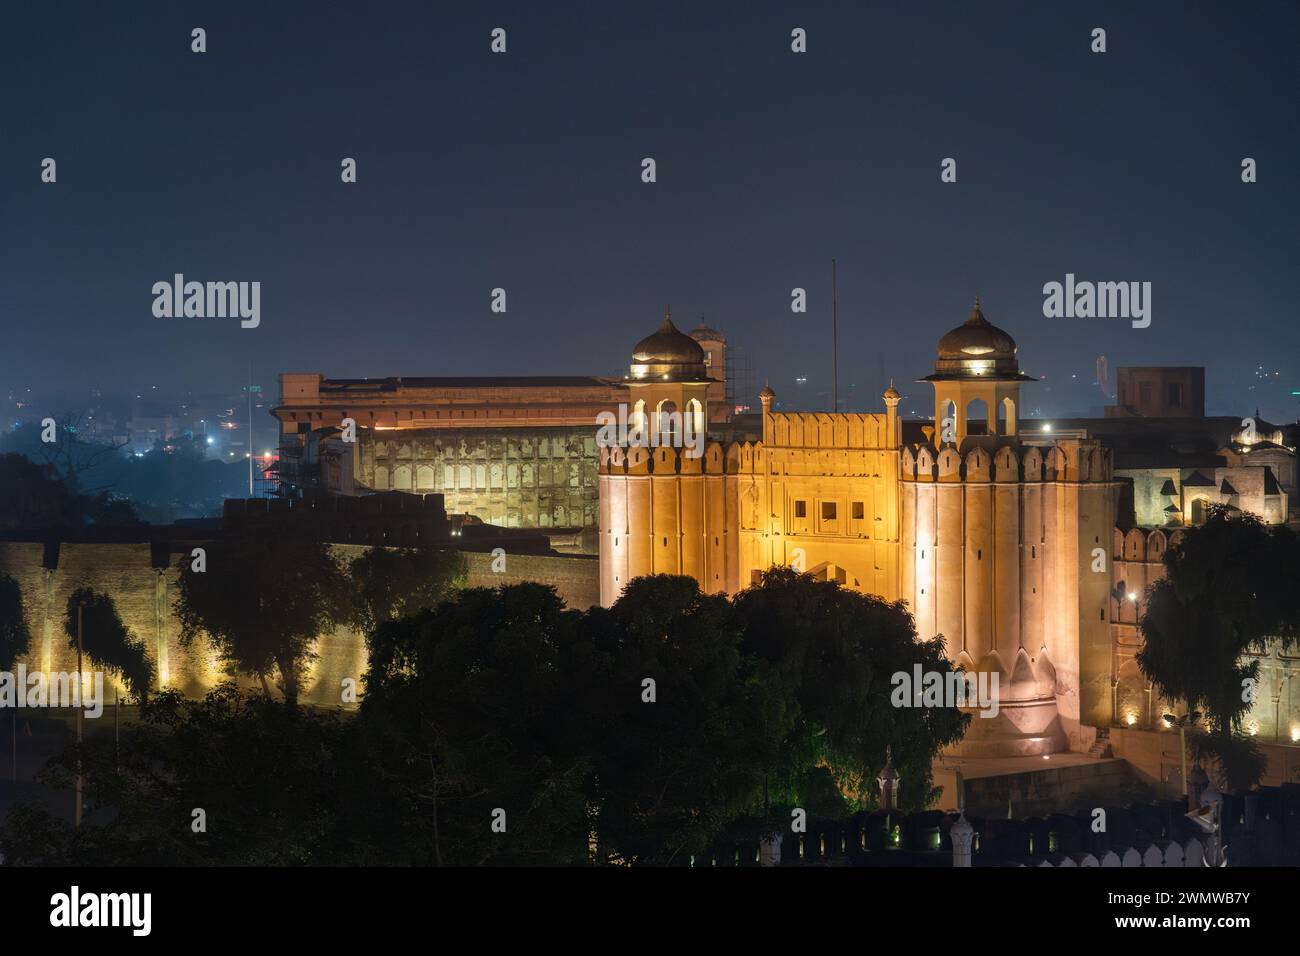 Night view on illuminated Alamgiri gate built by mughal emperor Aurangzeb as entrance to Lahore fort, a UNESCO World Heritage site, Punjab, Pakistan Stock Photo